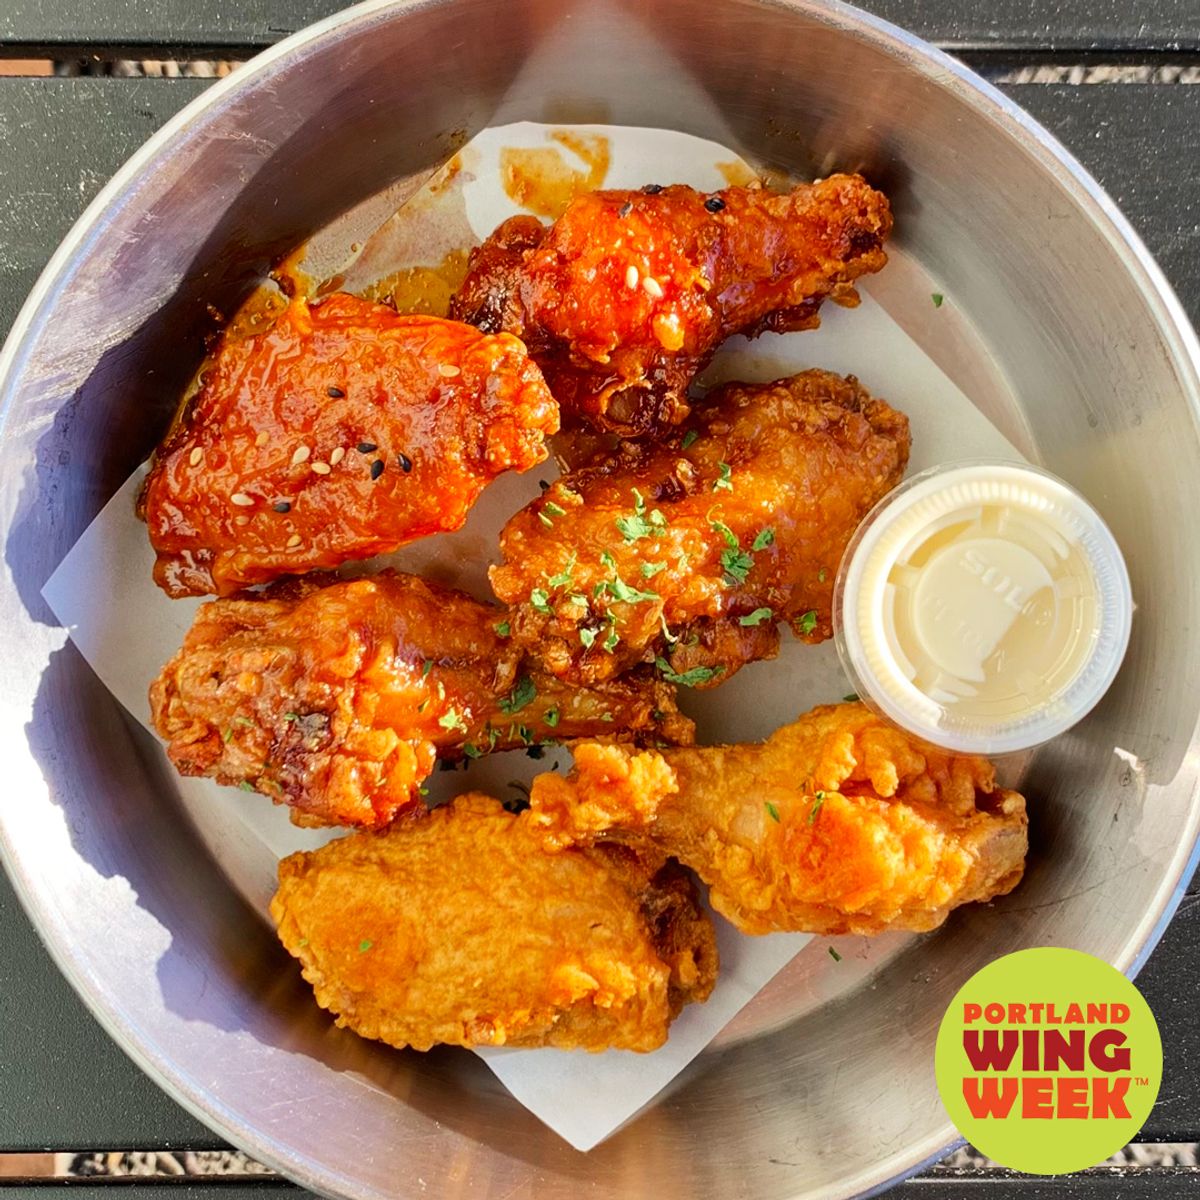 Fried Wing at ChiMcking in Portland, OR Every day, through October 9